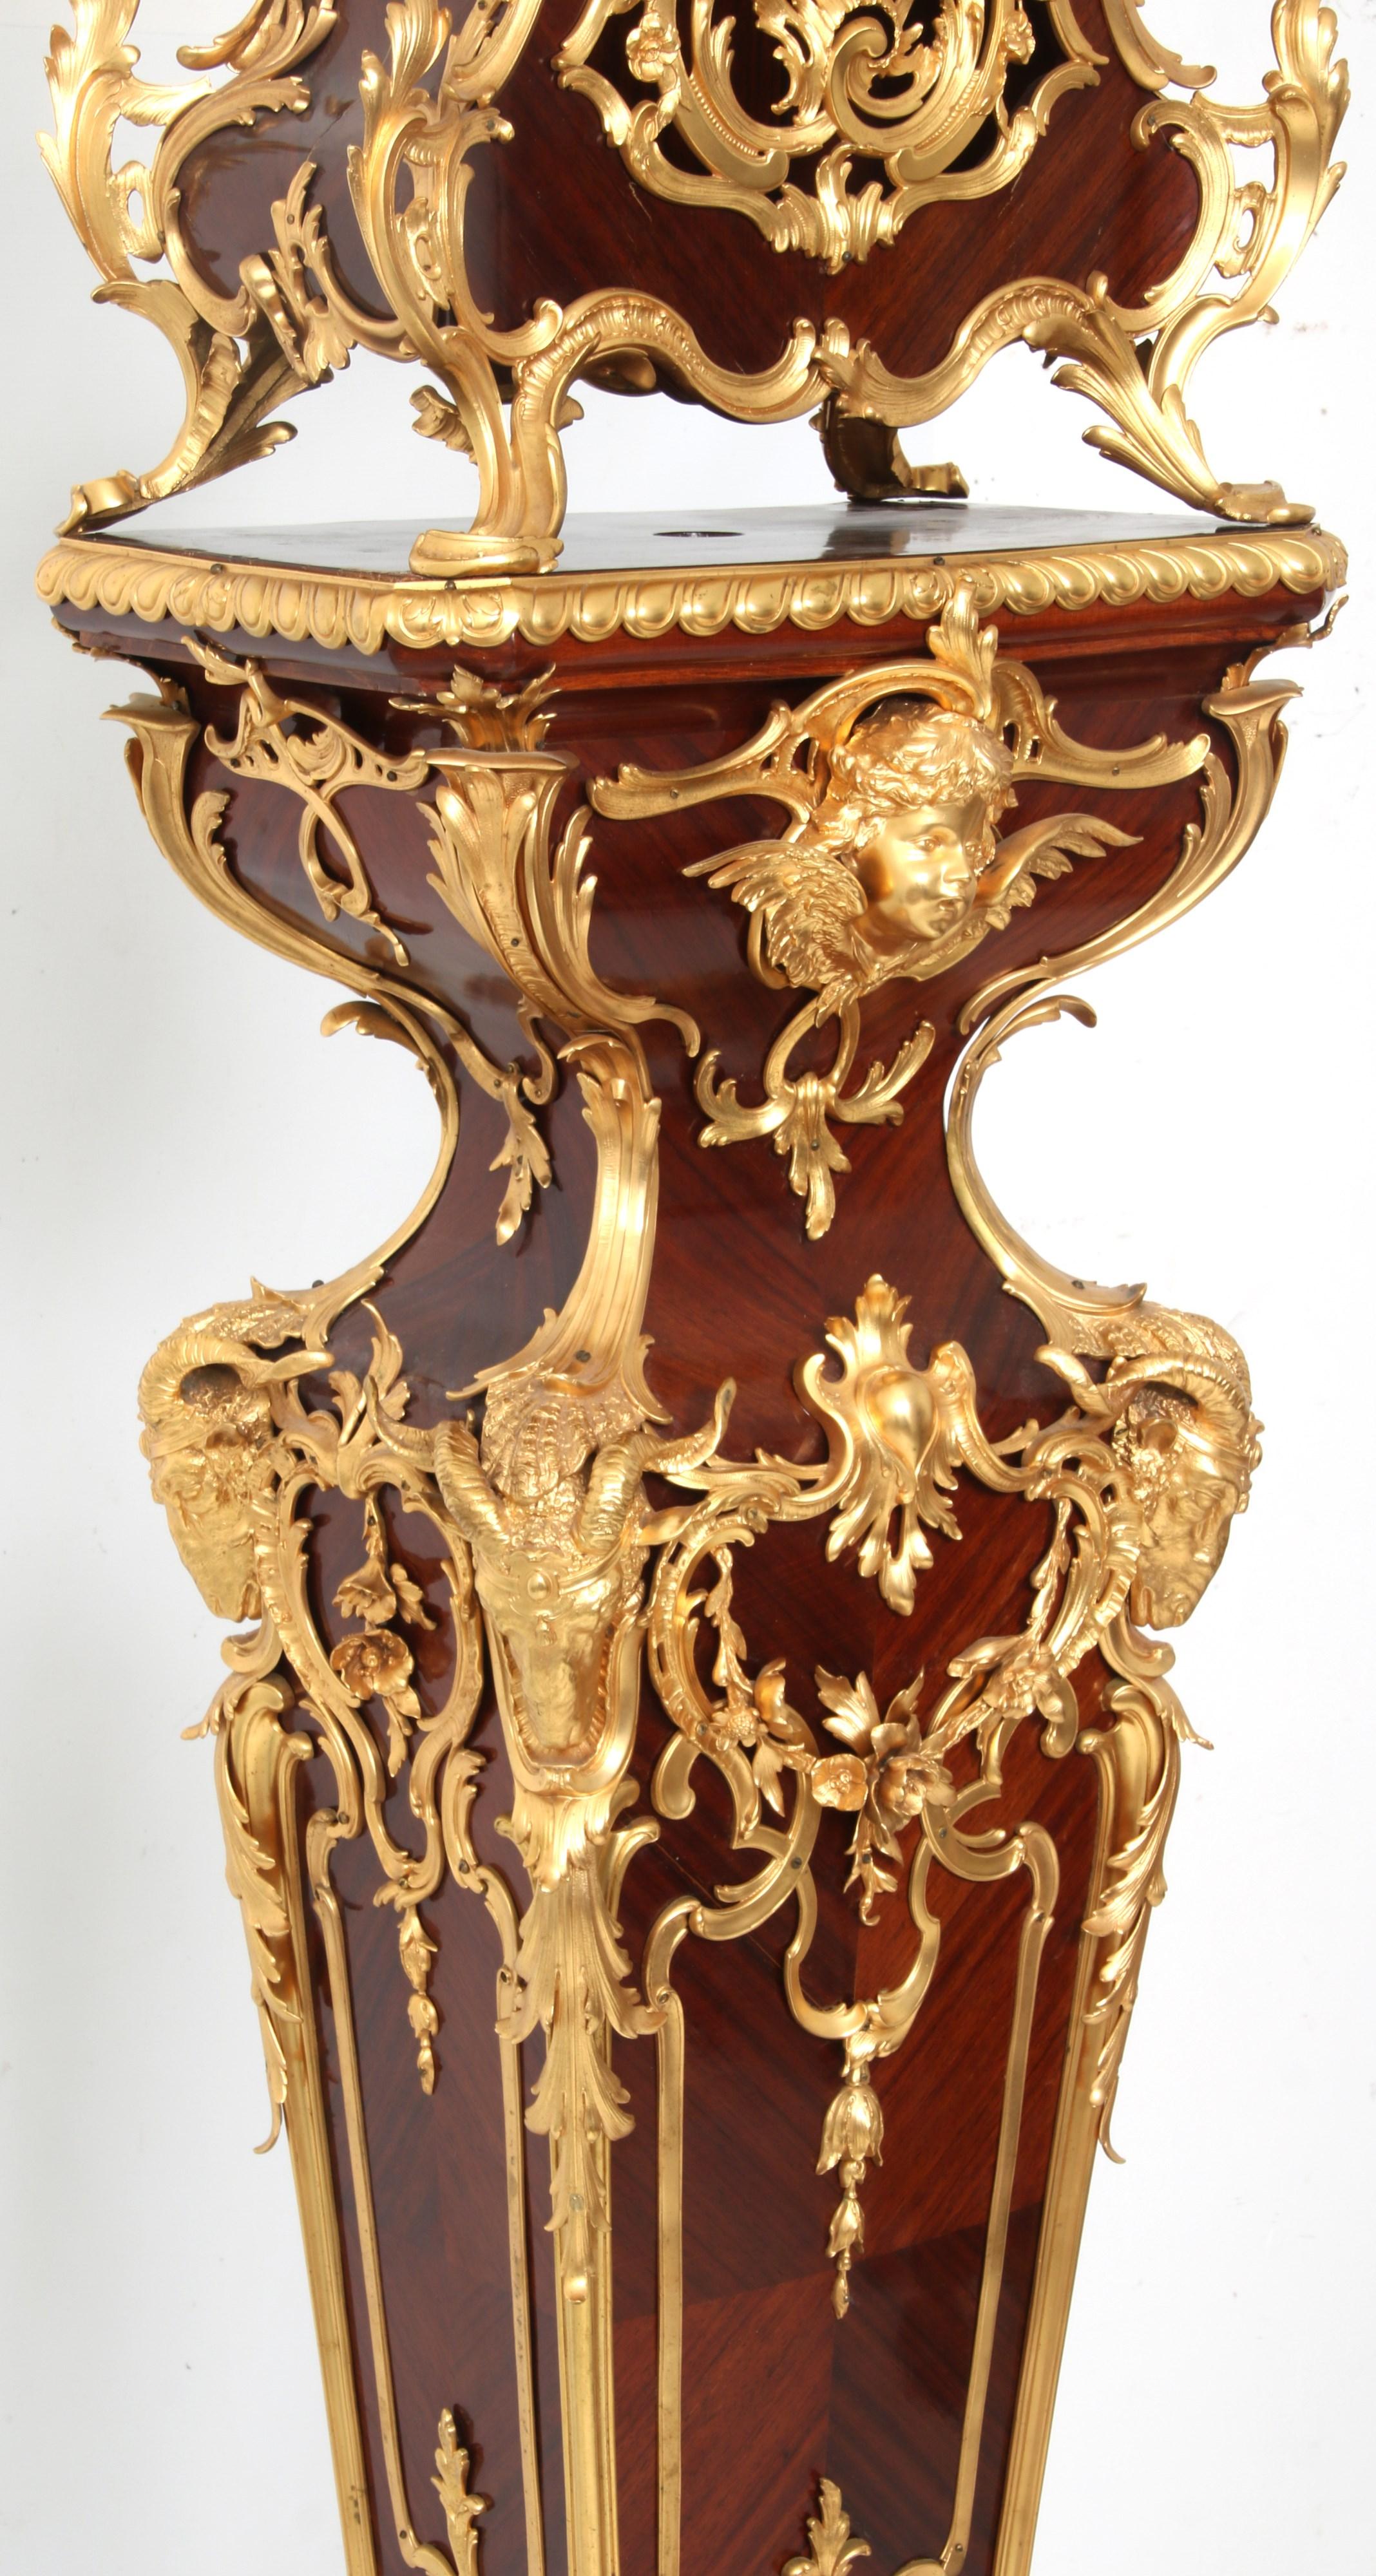 French 19th Century Louis XV Style Gilt Bronze Mounted Mahogany Clock on Pedestal For Sale